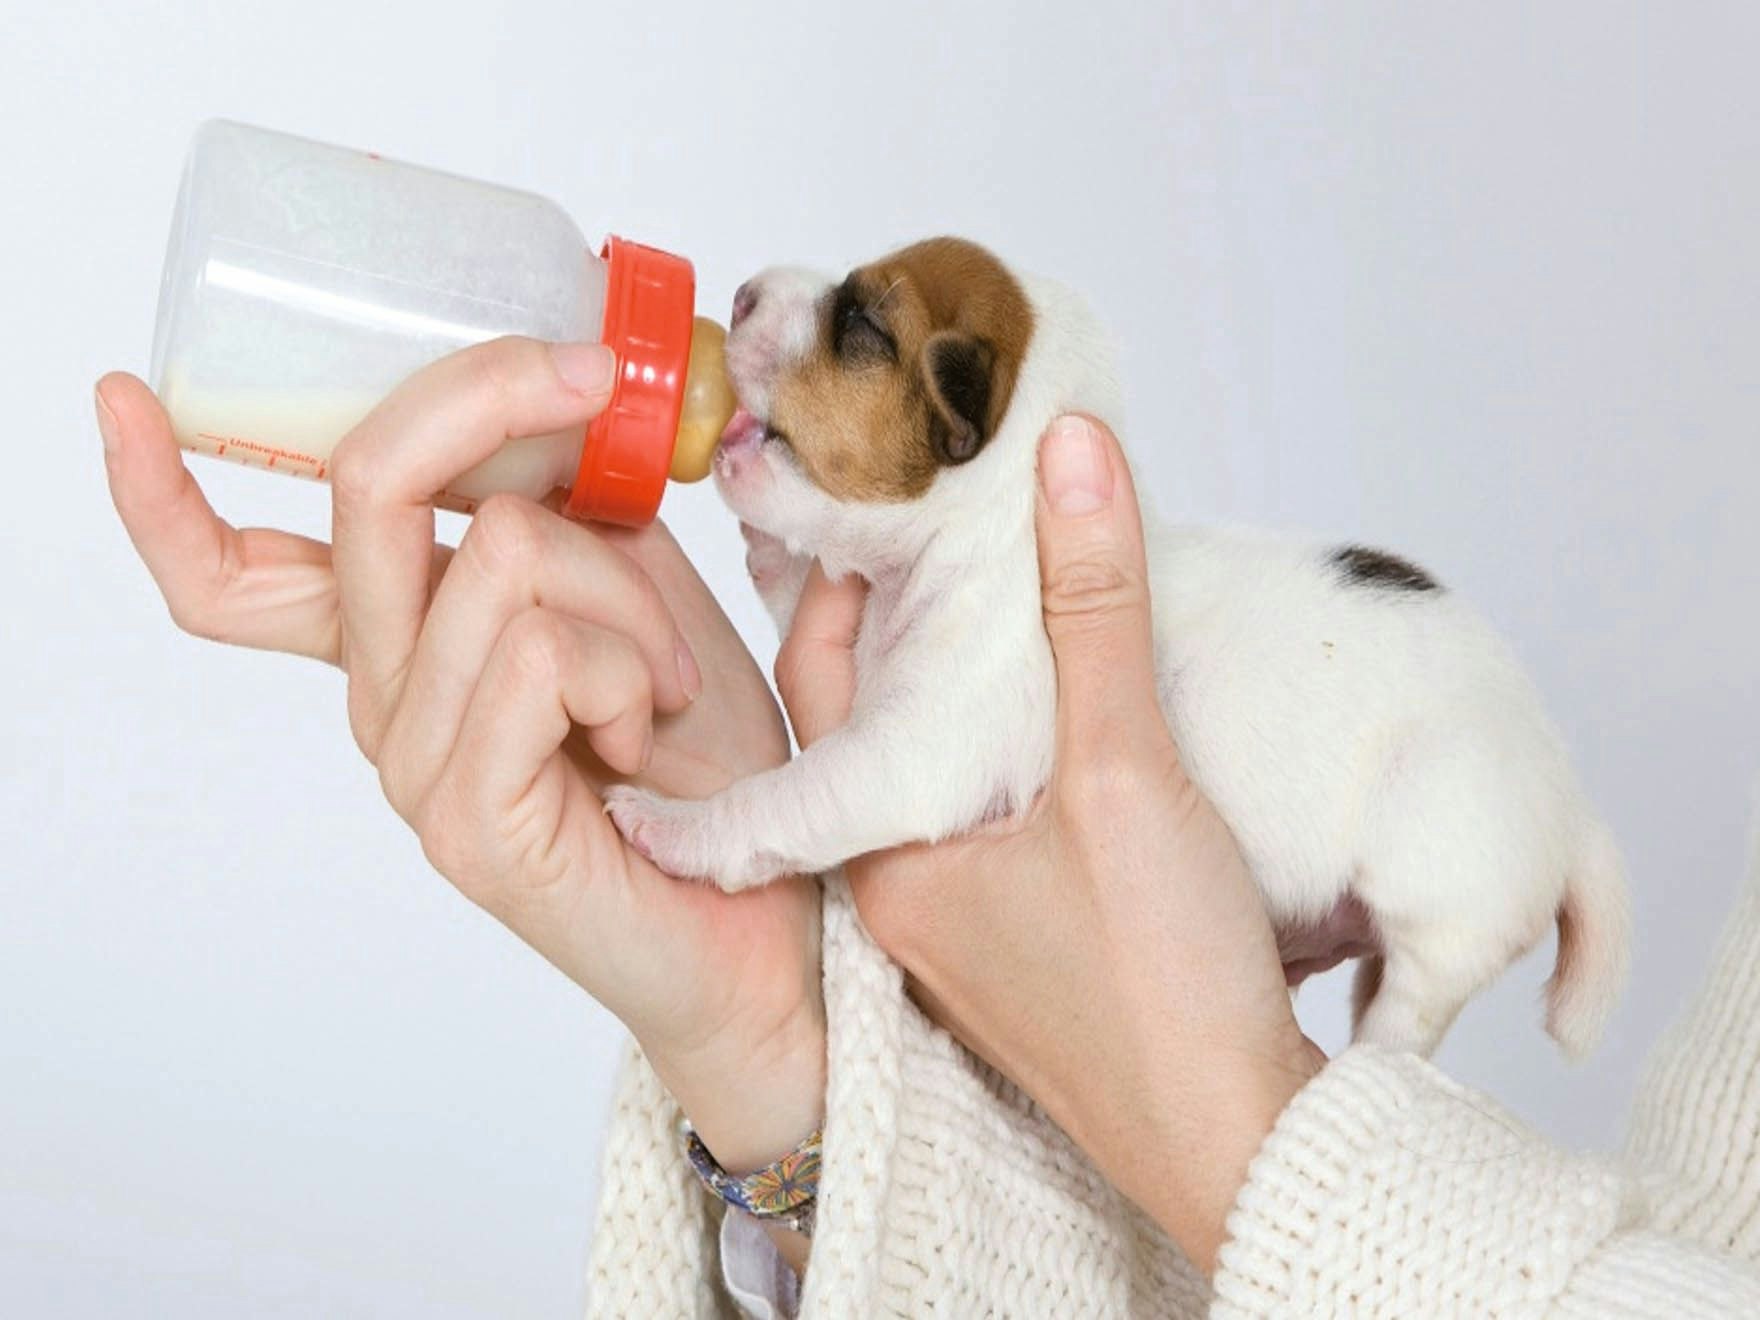 can i give my pregnant dog puppy milk